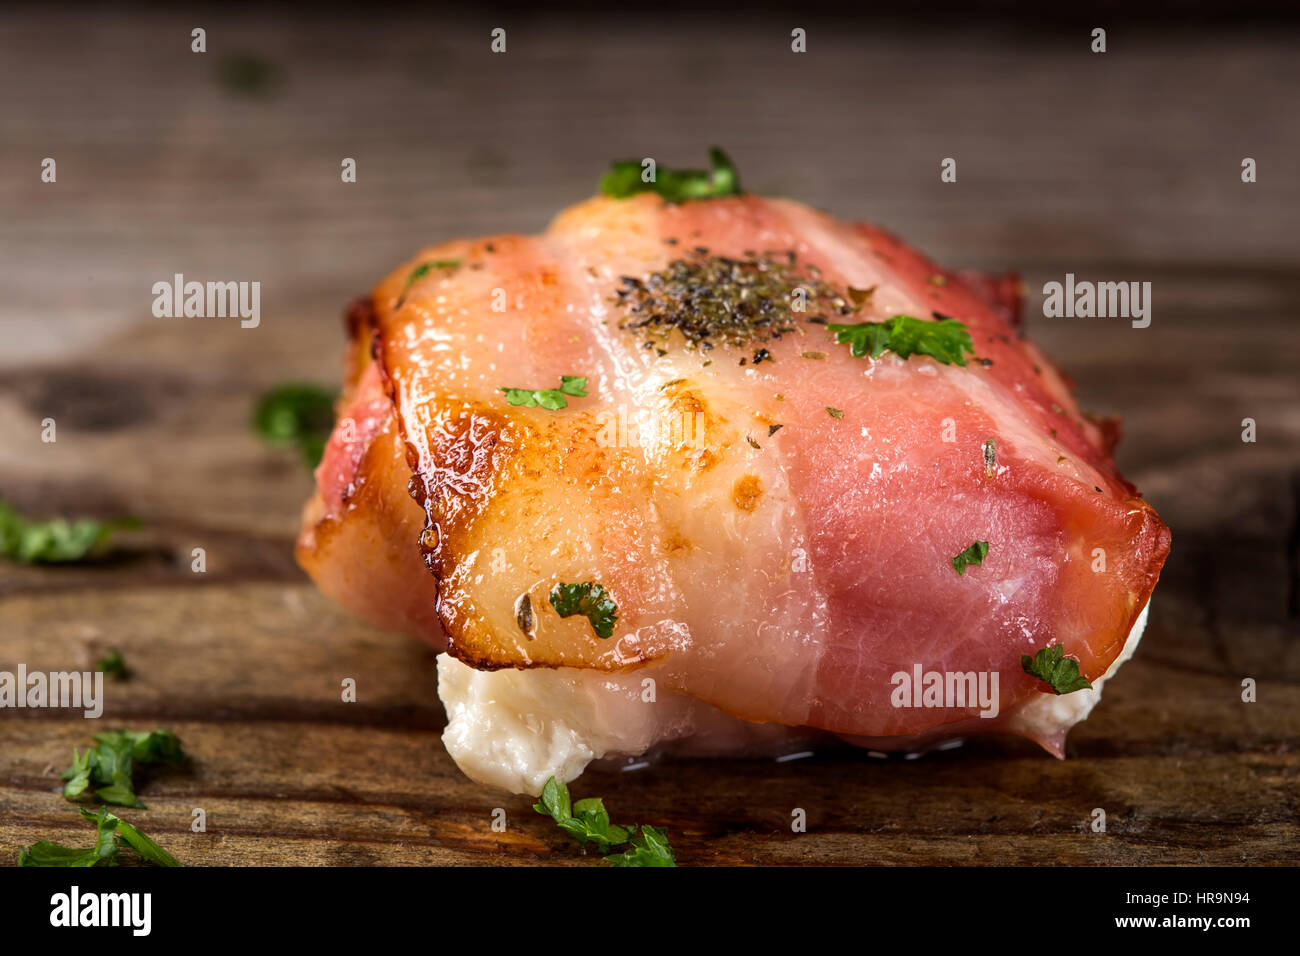 Close up of fried goat cheese wrapped in smoked bacon on wood with parsley Stock Photo